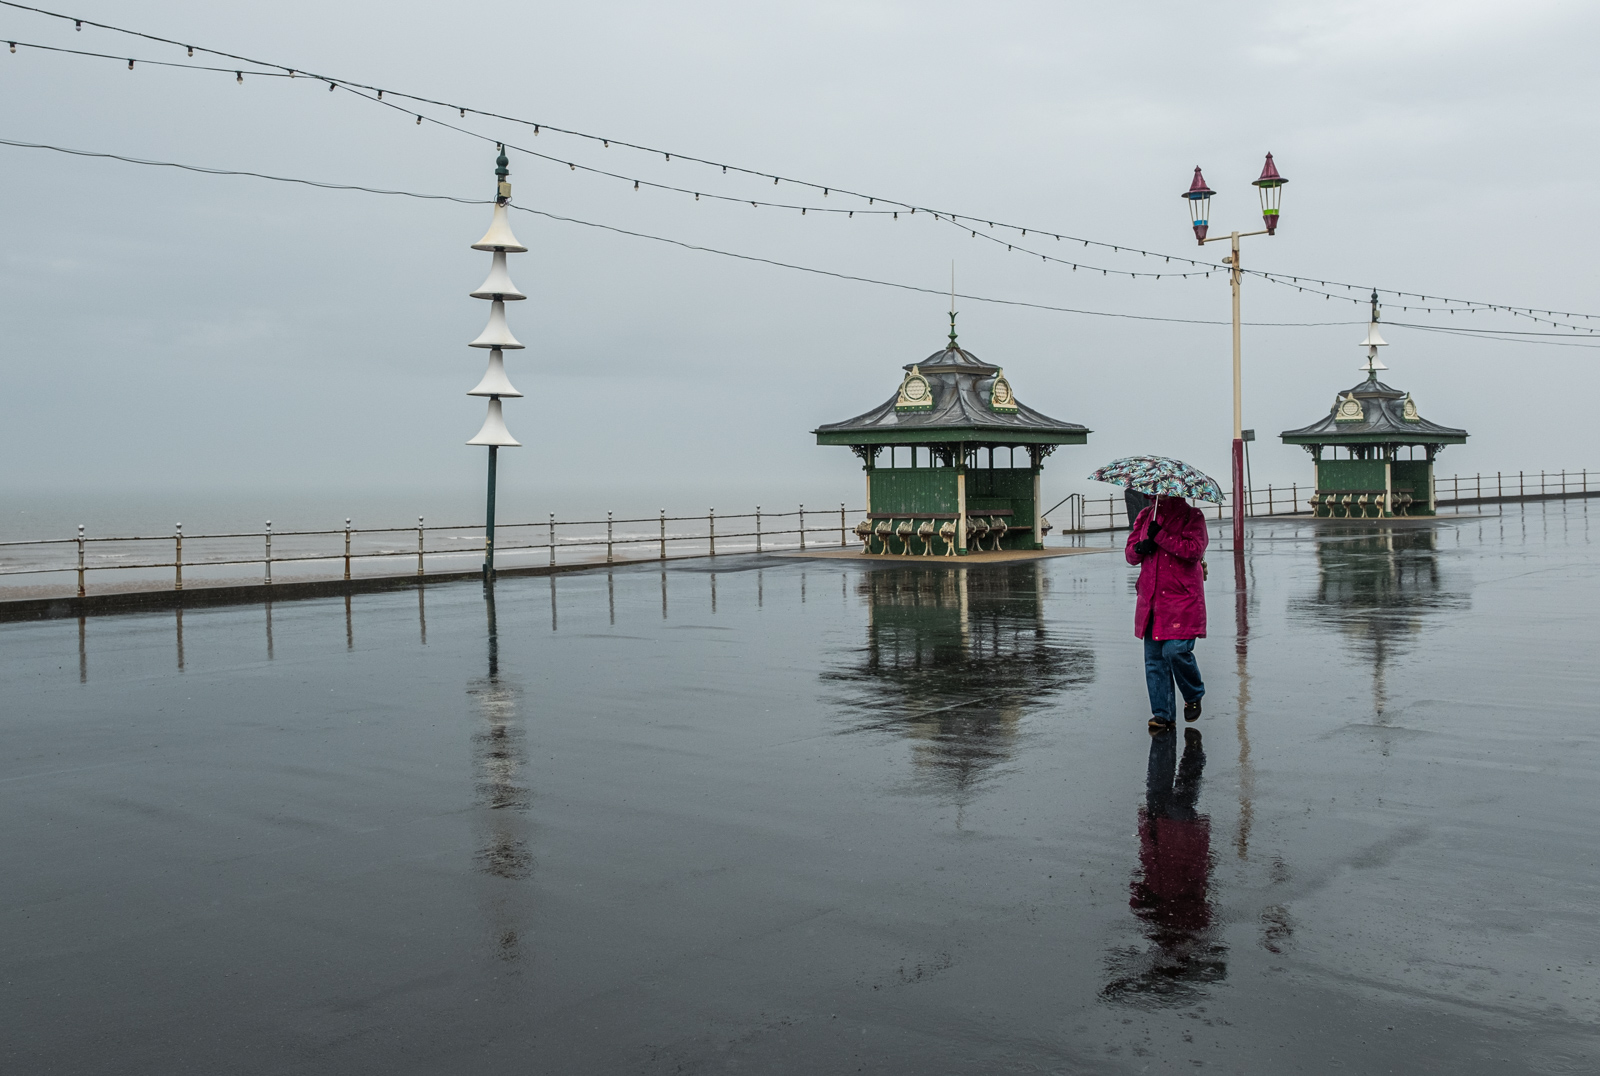 26. Welcome to Blackpool by Stewart Dodd LRPS